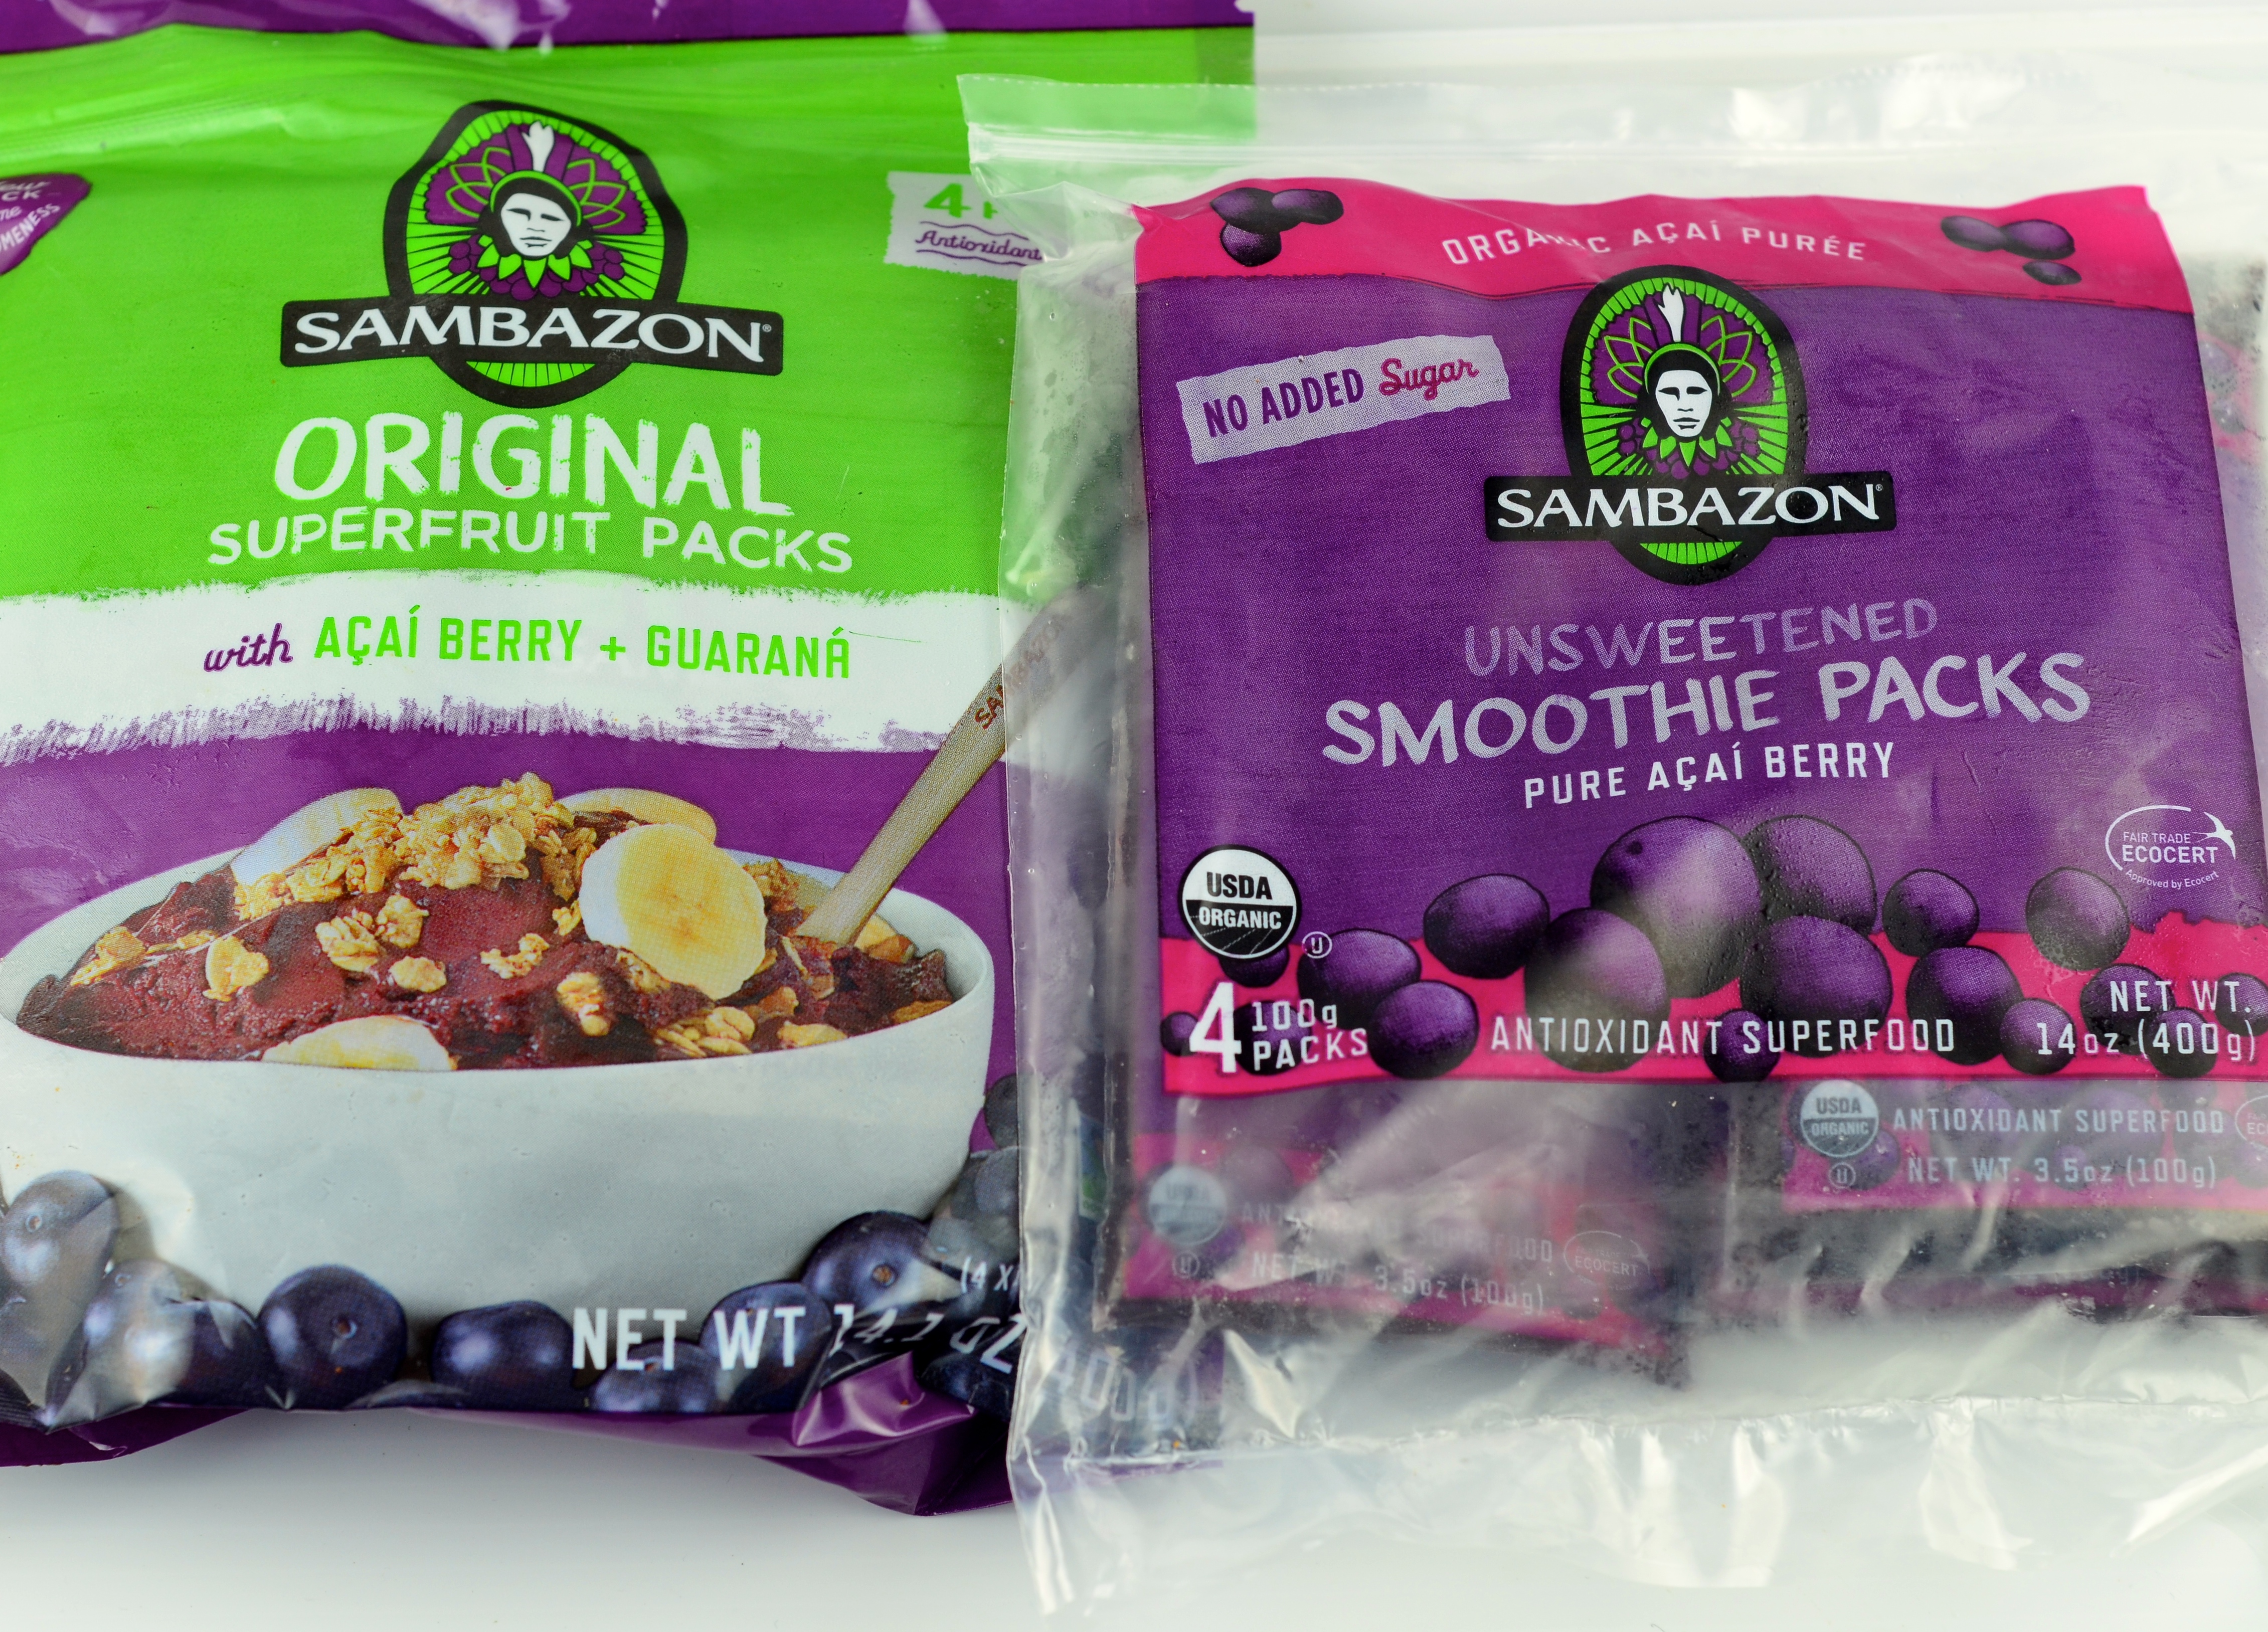 Sambazon Frozen Smoothie Packs Product Review